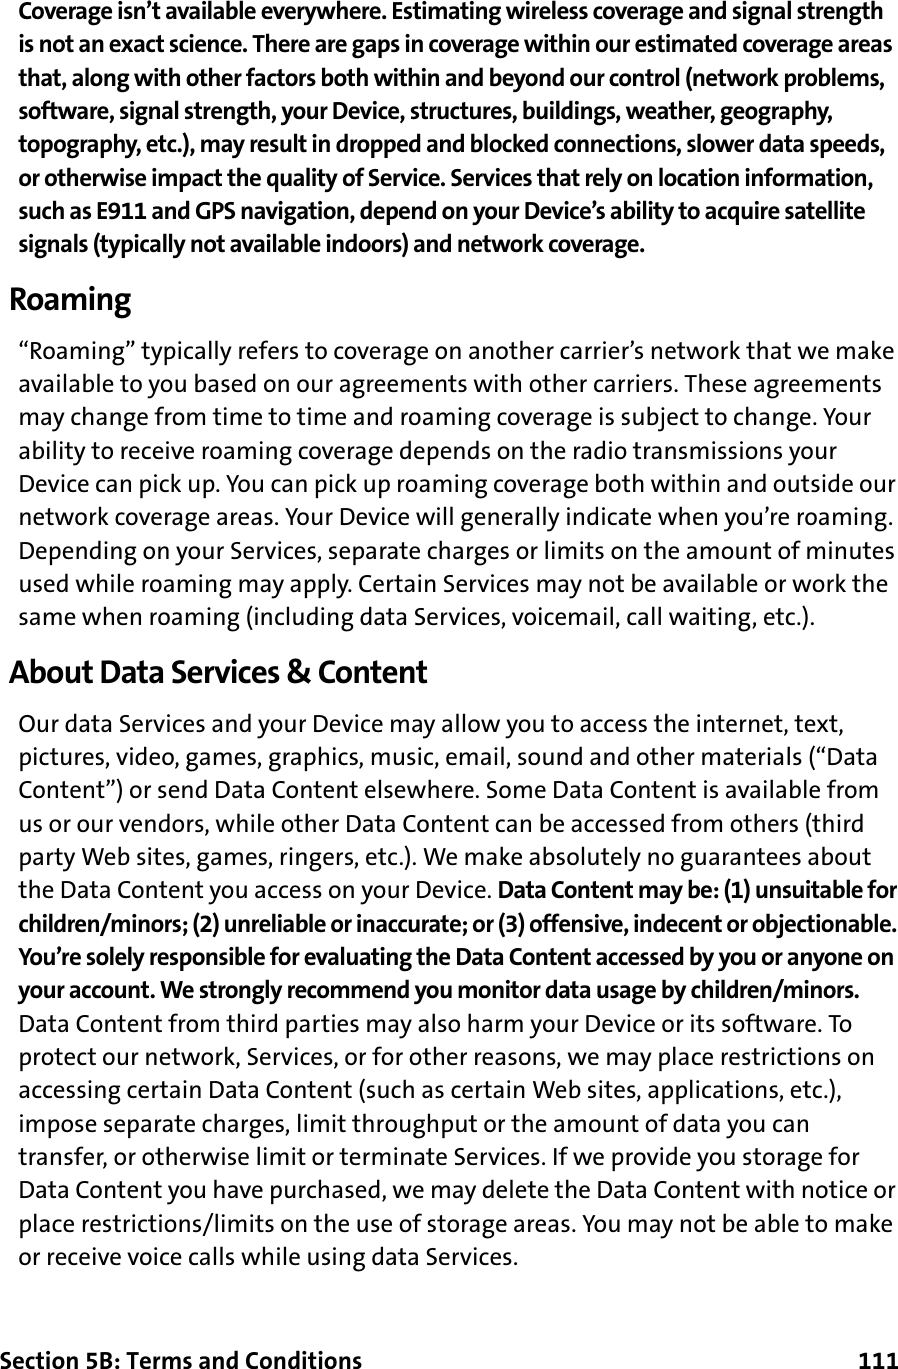 Section 5B: Terms and Conditions      111Coverage isn’t available everywhere. Estimating wireless coverage and signal strength is not an exact science. There are gaps in coverage within our estimated coverage areas that, along with other factors both within and beyond our control (network problems, software, signal strength, your Device, structures, buildings, weather, geography, topography, etc.), may result in dropped and blocked connections, slower data speeds, or otherwise impact the quality of Service. Services that rely on location information, such as E911 and GPS navigation, depend on your Device’s ability to acquire satellite signals (typically not available indoors) and network coverage.Roaming“Roaming” typically refers to coverage on another carrier’s network that we make available to you based on our agreements with other carriers. These agreements may change from time to time and roaming coverage is subject to change. Your ability to receive roaming coverage depends on the radio transmissions your Device can pick up. You can pick up roaming coverage both within and outside our network coverage areas. Your Device will generally indicate when you’re roaming. Depending on your Services, separate charges or limits on the amount of minutes used while roaming may apply. Certain Services may not be available or work the same when roaming (including data Services, voicemail, call waiting, etc.).About Data Services &amp; ContentOur data Services and your Device may allow you to access the internet, text, pictures, video, games, graphics, music, email, sound and other materials (“Data Content”) or send Data Content elsewhere. Some Data Content is available from us or our vendors, while other Data Content can be accessed from others (third party Web sites, games, ringers, etc.). We make absolutely no guarantees about the Data Content you access on your Device. Data Content may be: (1) unsuitable for children/minors; (2) unreliable or inaccurate; or (3) offensive, indecent or objectionable. You’re solely responsible for evaluating the Data Content accessed by you or anyone on your account. We strongly recommend you monitor data usage by children/minors. Data Content from third parties may also harm your Device or its software. To protect our network, Services, or for other reasons, we may place restrictions on accessing certain Data Content (such as certain Web sites, applications, etc.), impose separate charges, limit throughput or the amount of data you can transfer, or otherwise limit or terminate Services. If we provide you storage for Data Content you have purchased, we may delete the Data Content with notice or place restrictions/limits on the use of storage areas. You may not be able to make or receive voice calls while using data Services.